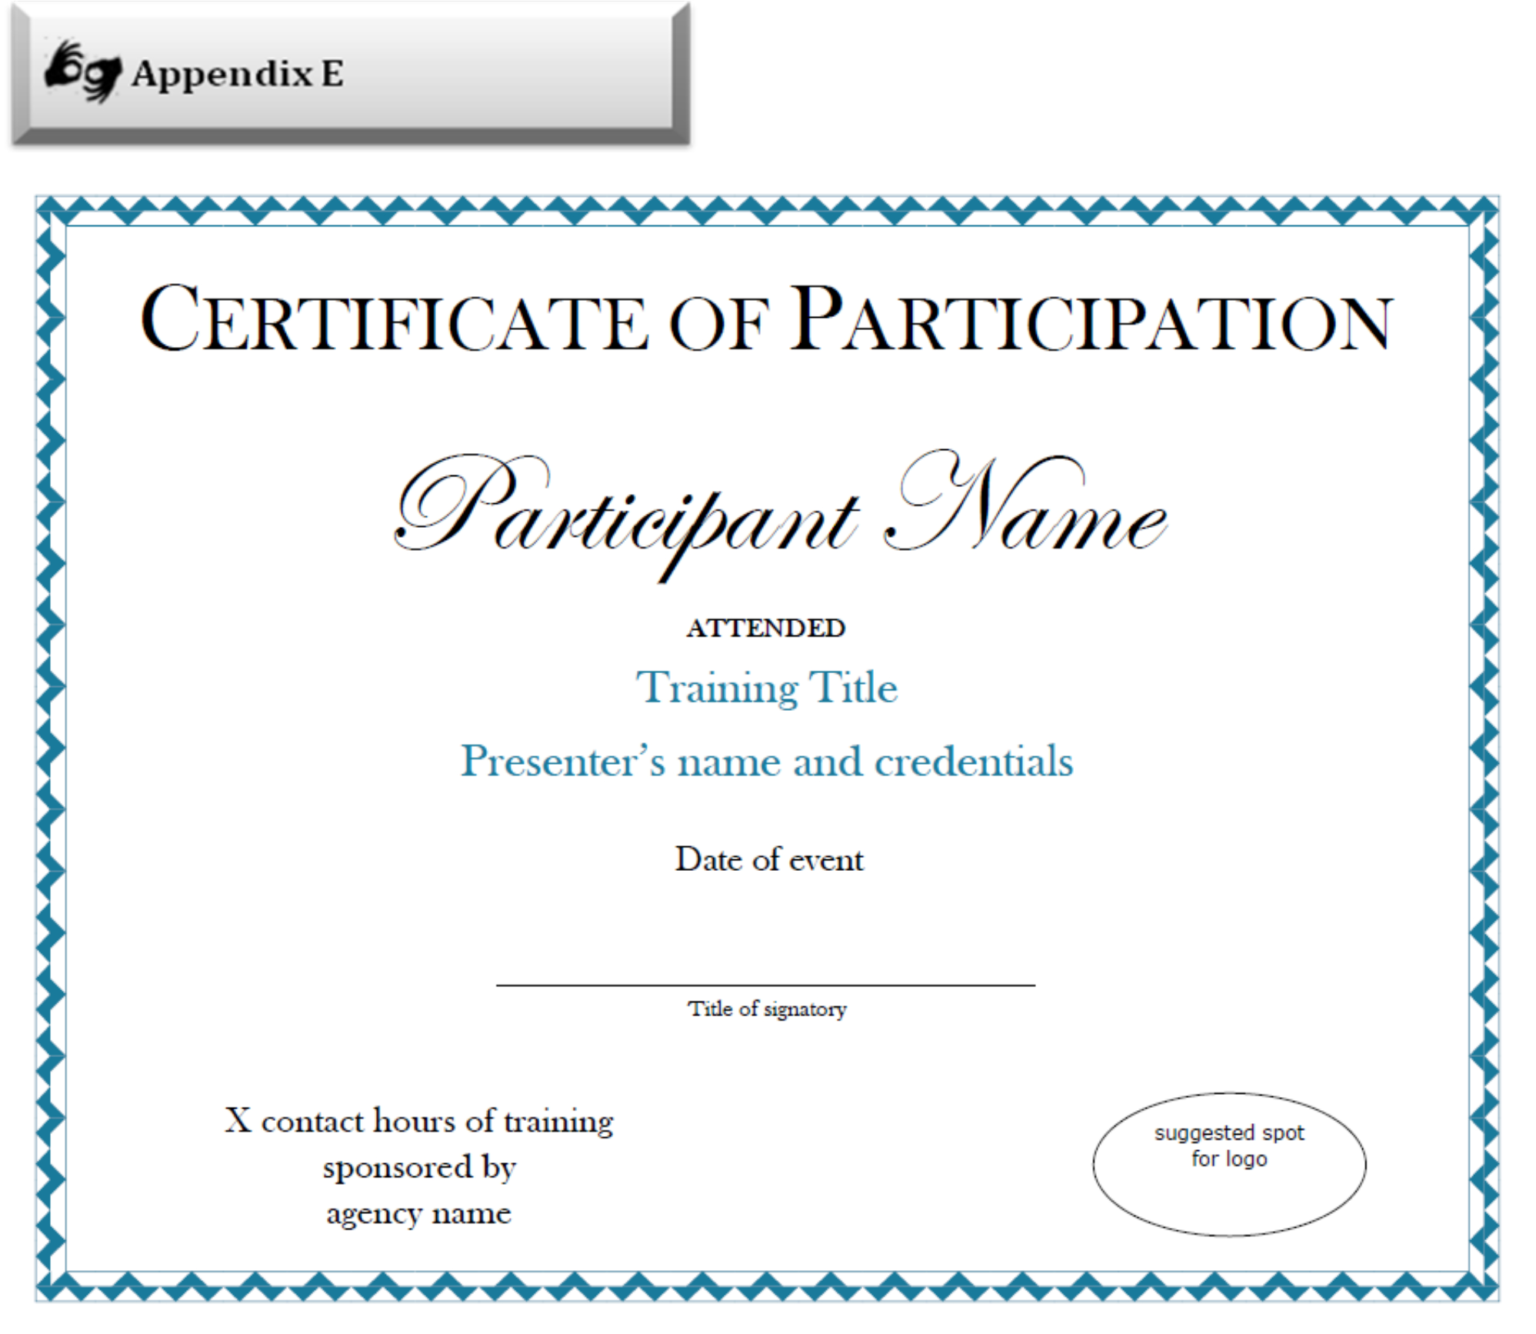 Certificate Of Participation Sample Free Download With Certificate Of